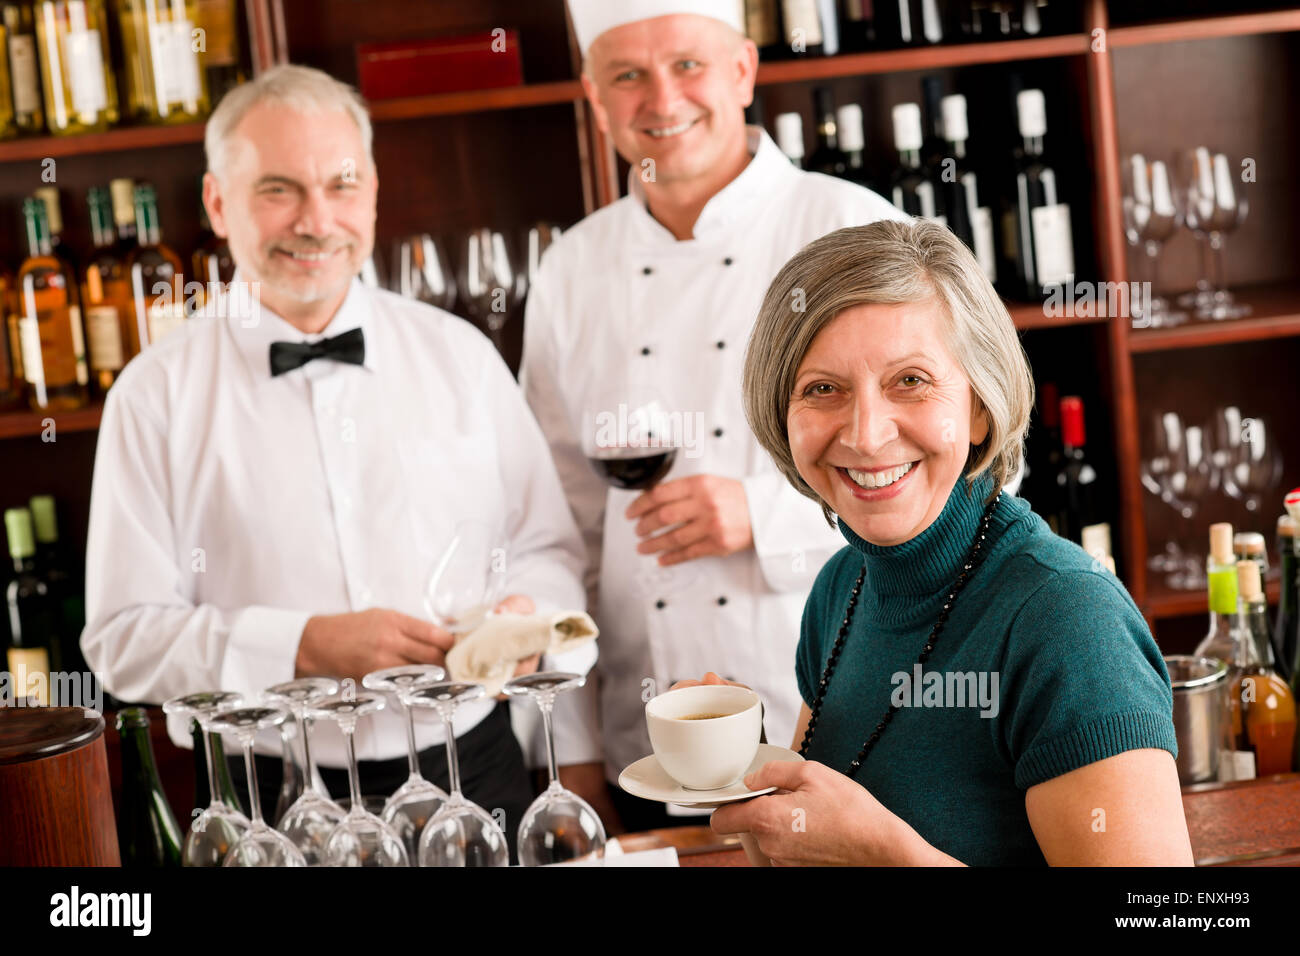 Restaurant smiling manager with staff wine bar Stock Photo